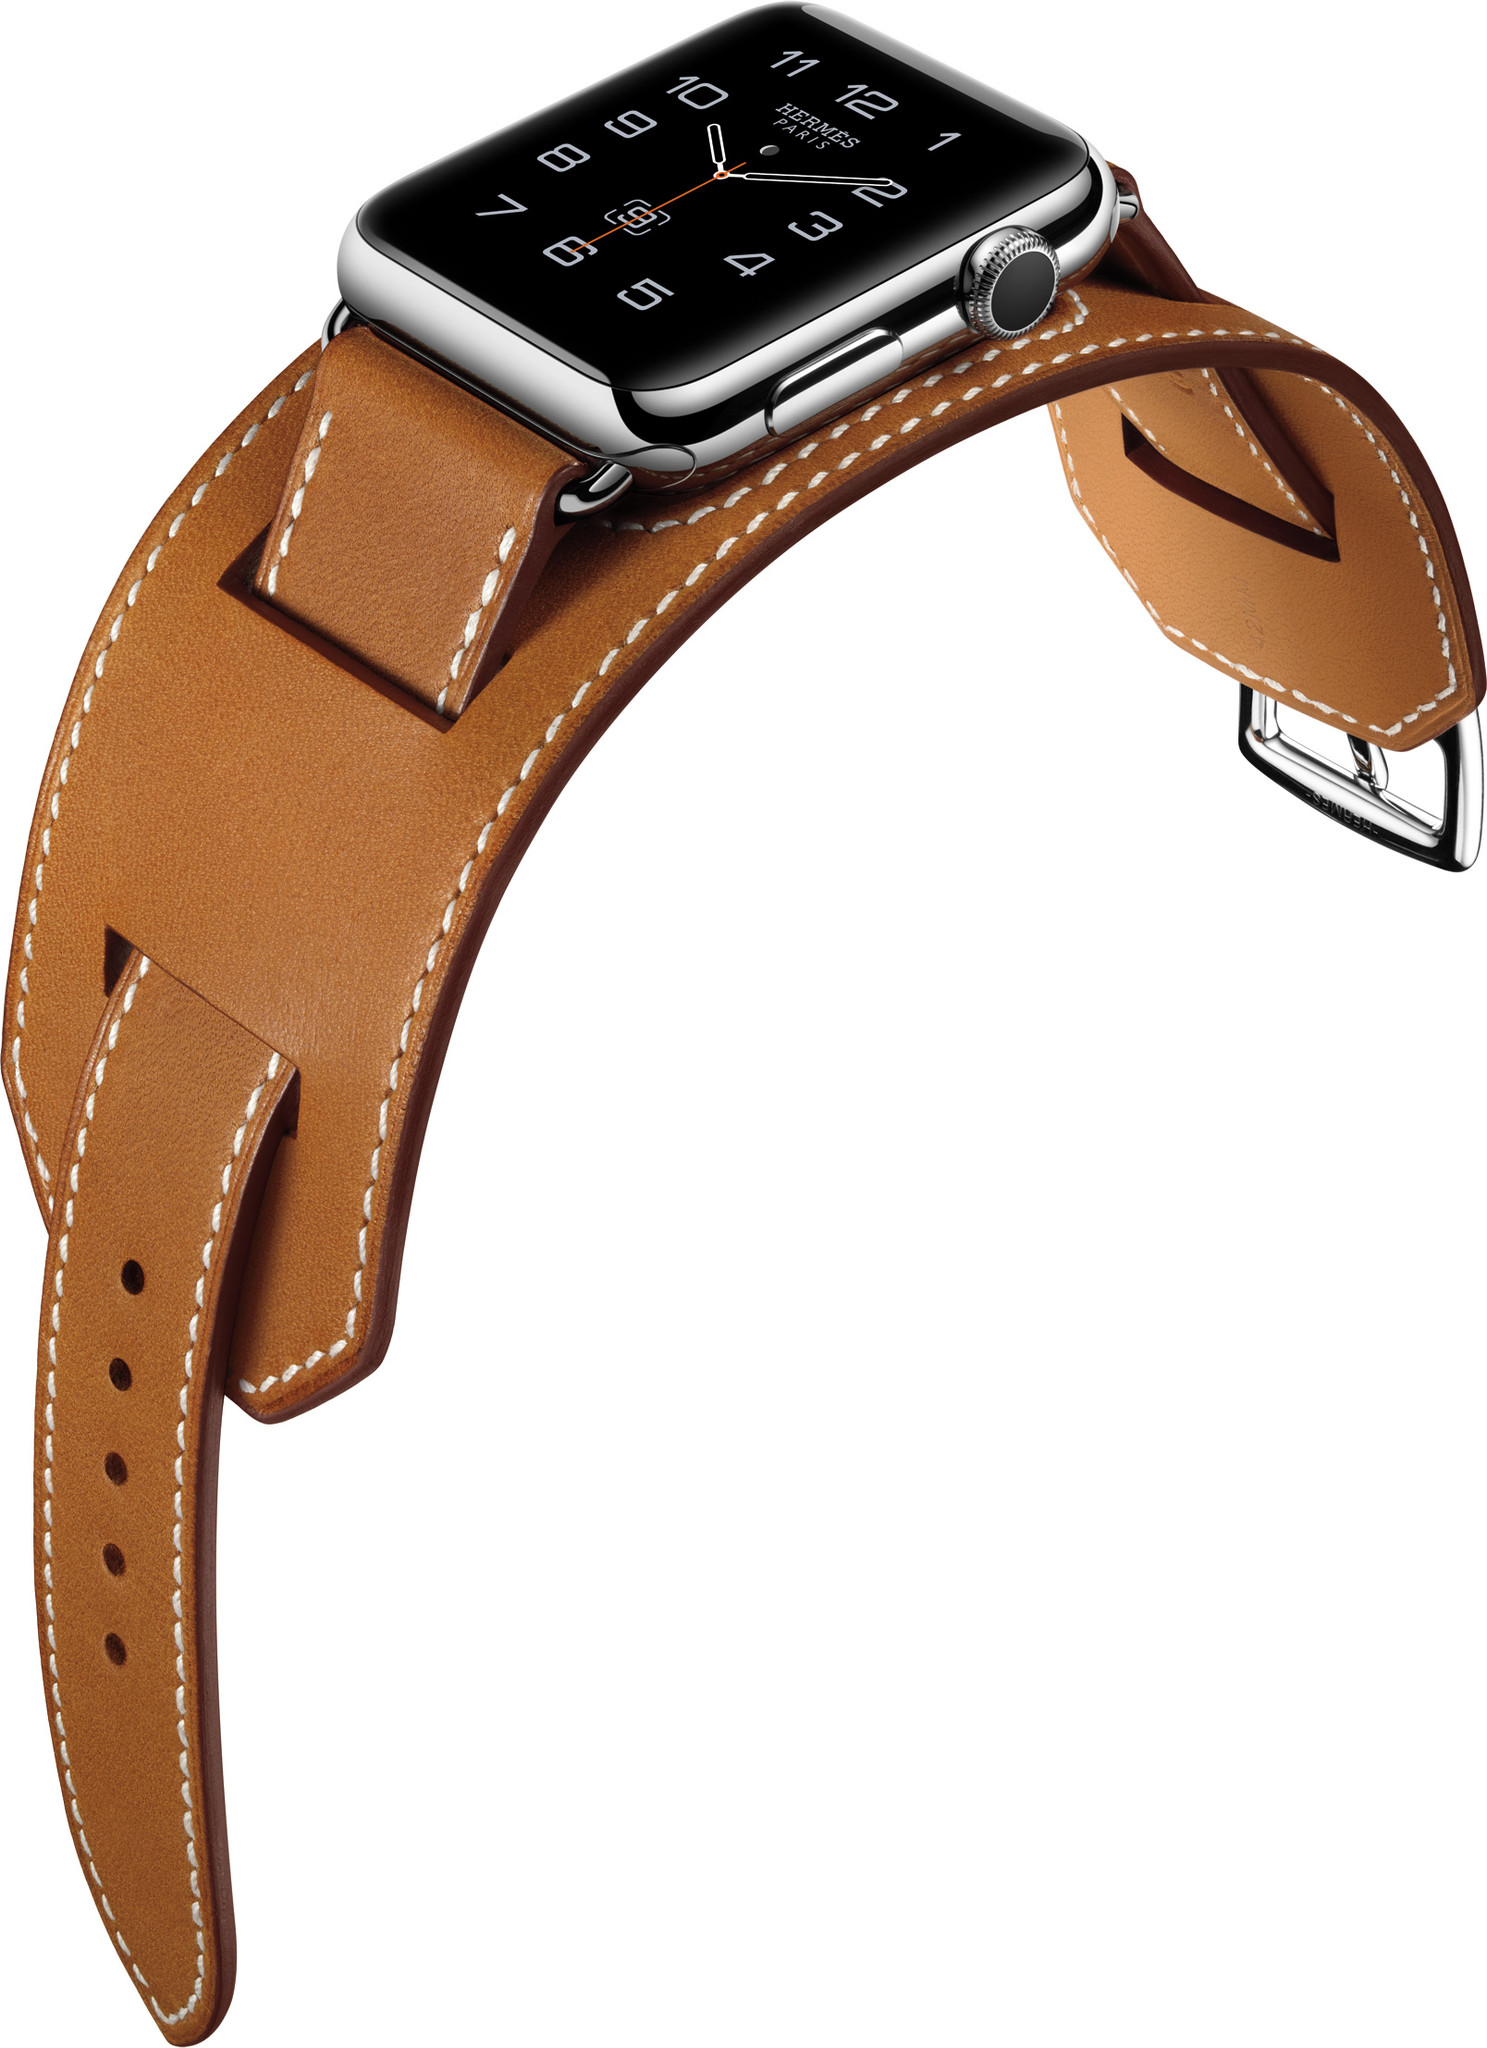 rose gold apple watch with hermes band